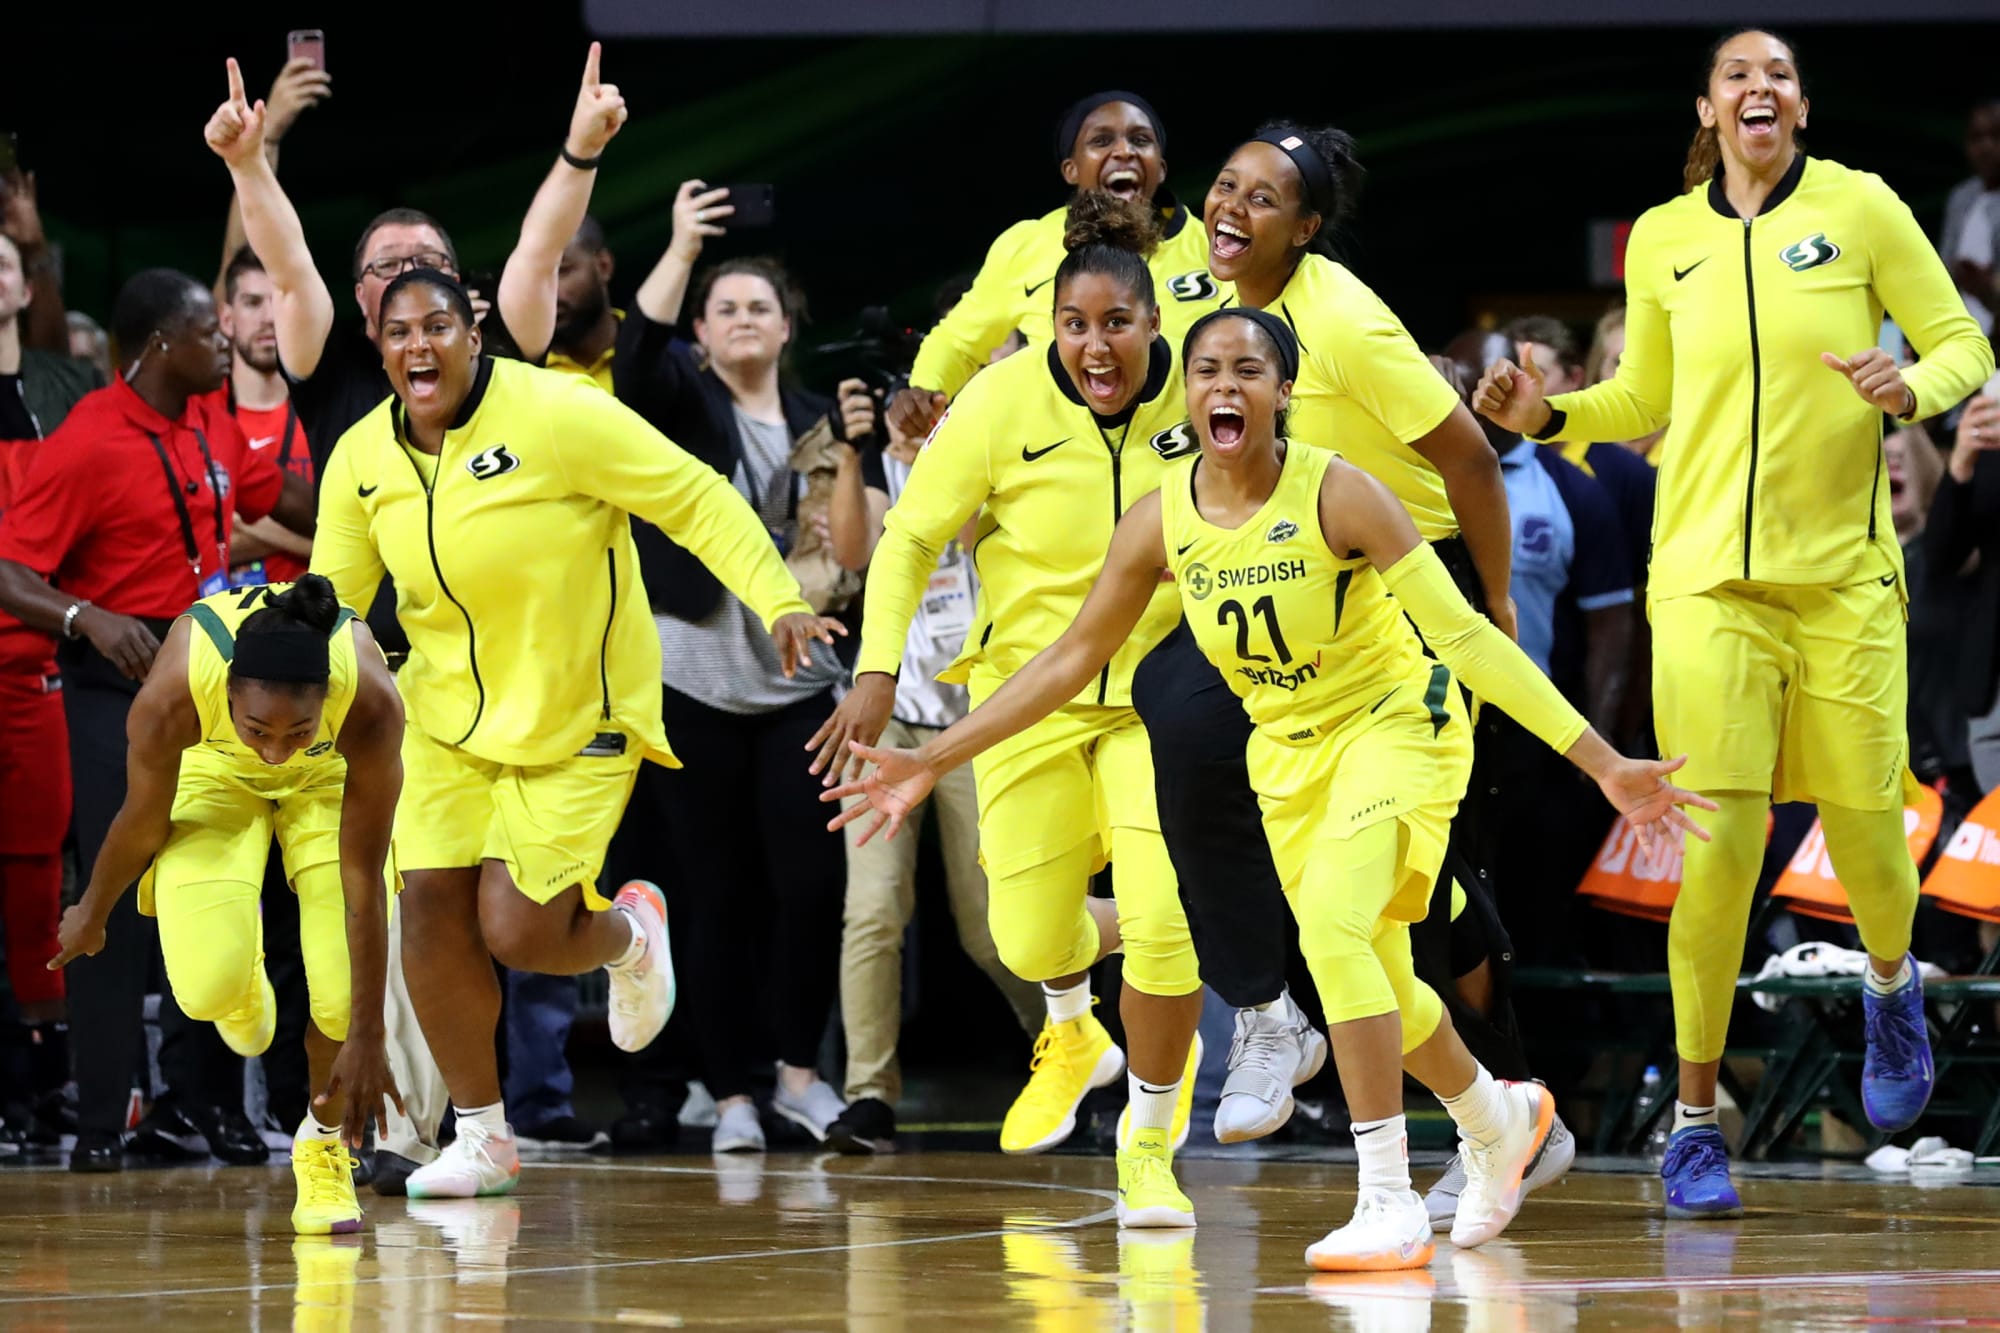 WNBA Finals Jordin Canada and the Seattle Storm are champions!